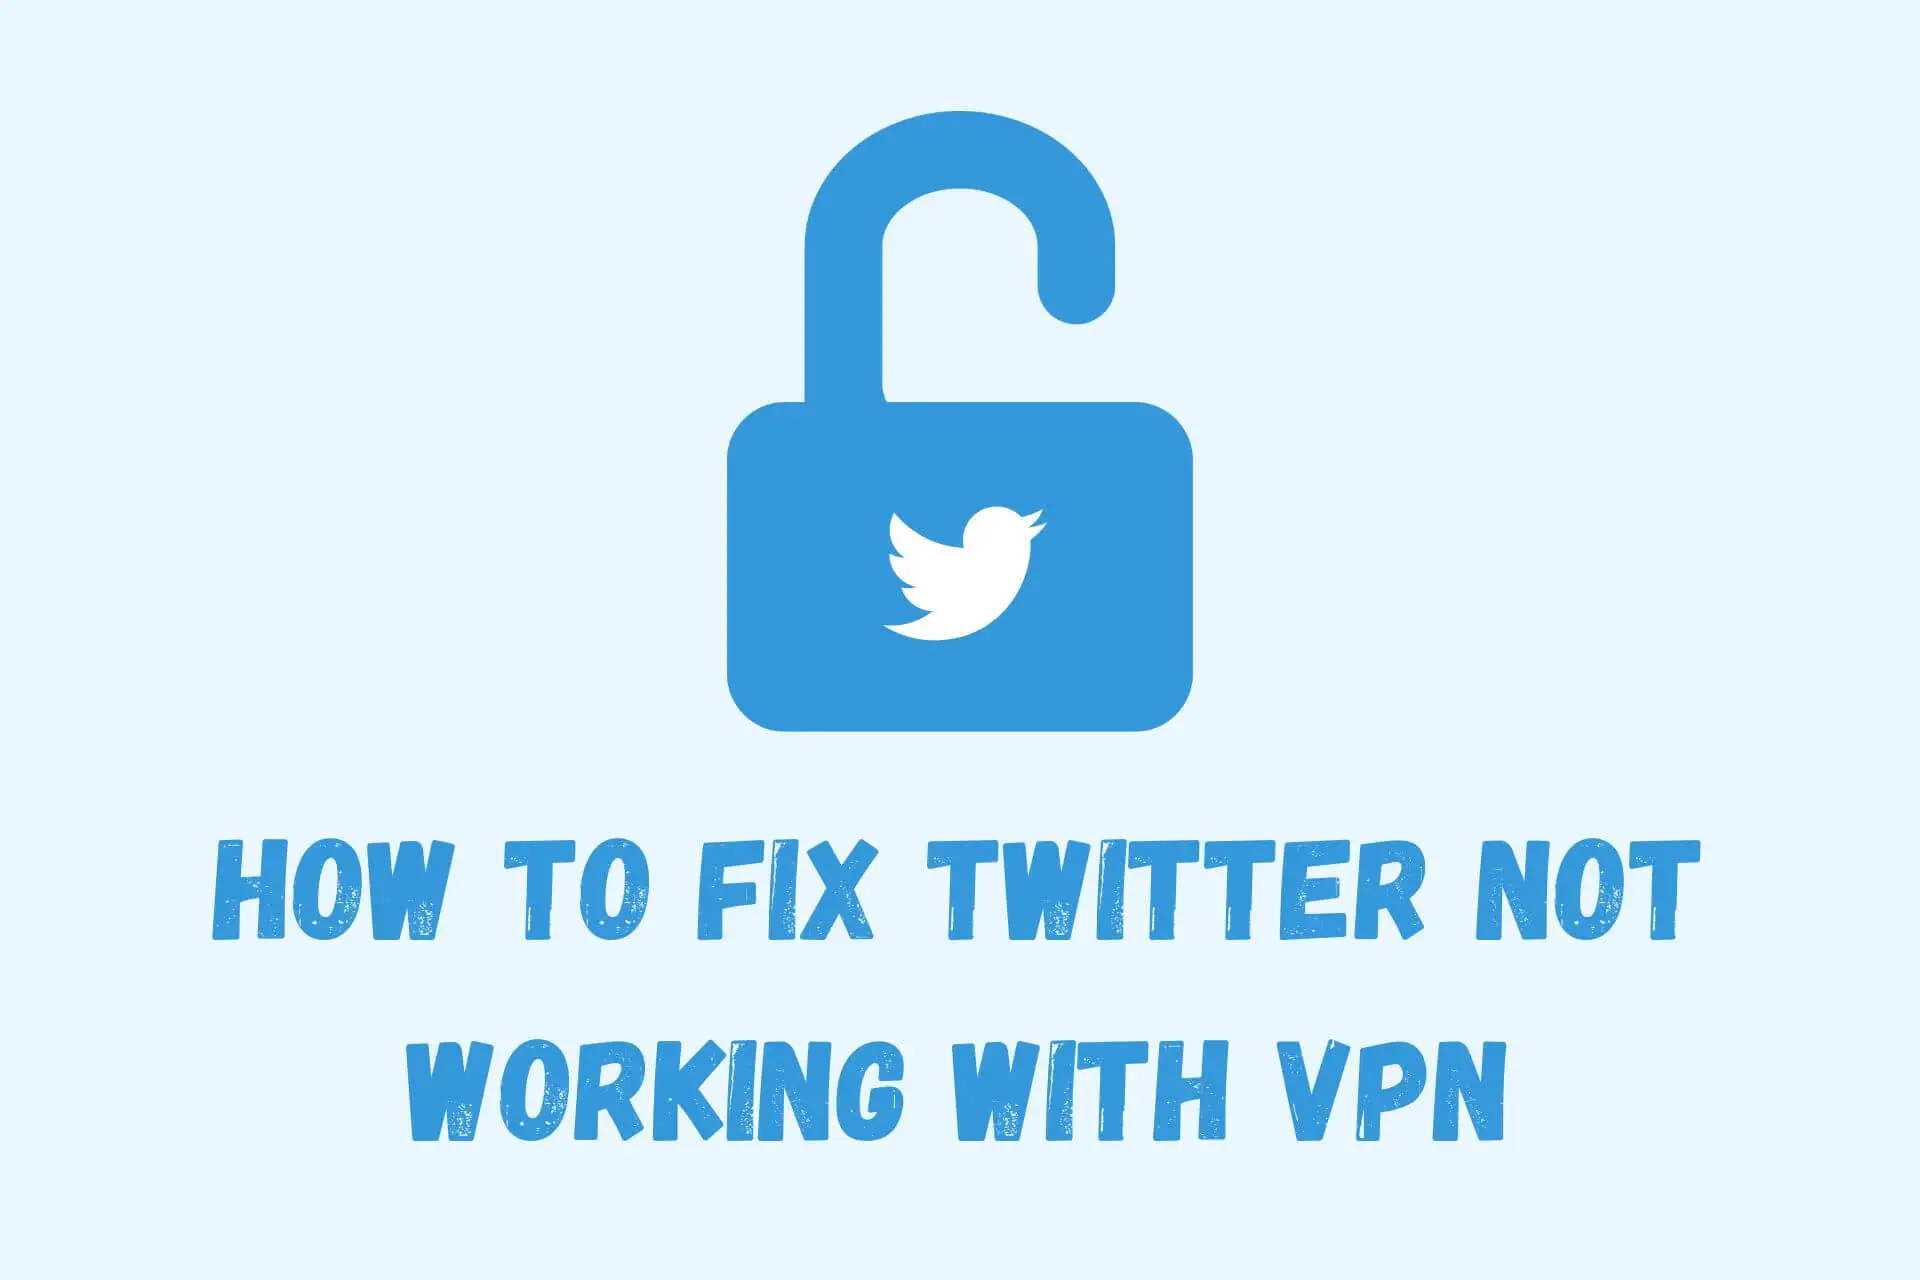 twitter not working with vpn